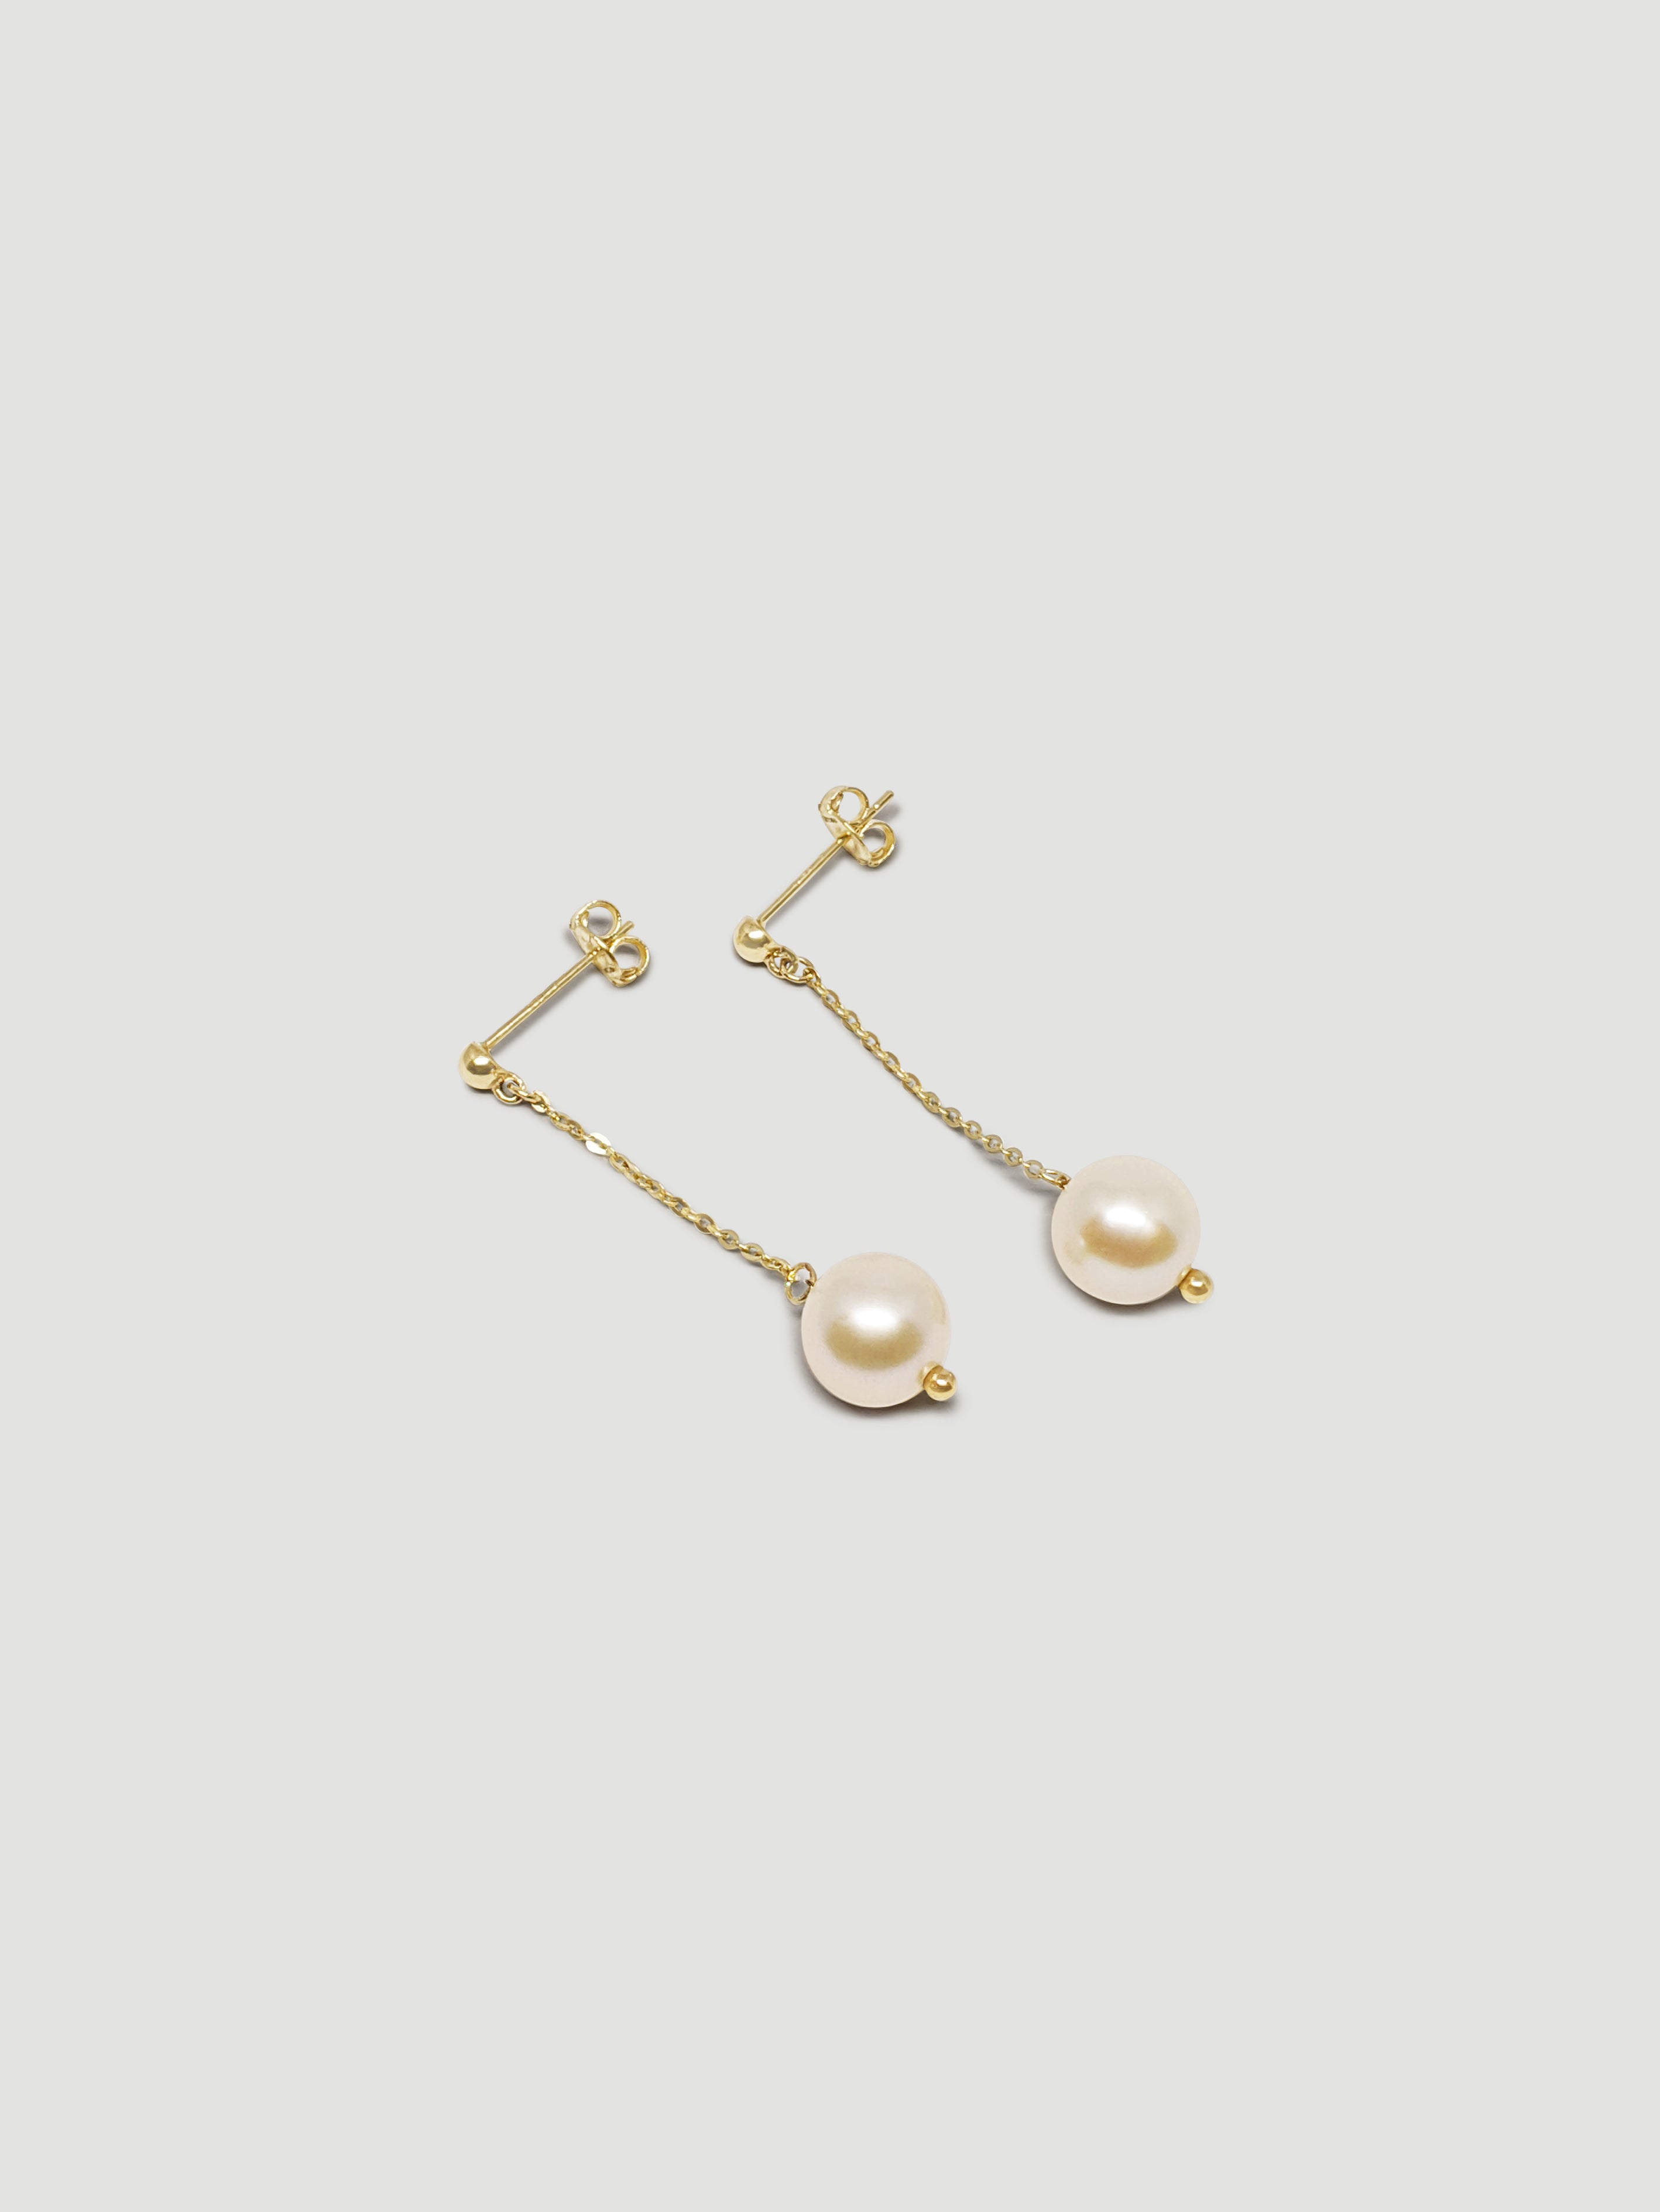 THE PEARL AND CHAIN DROP EARRINGS